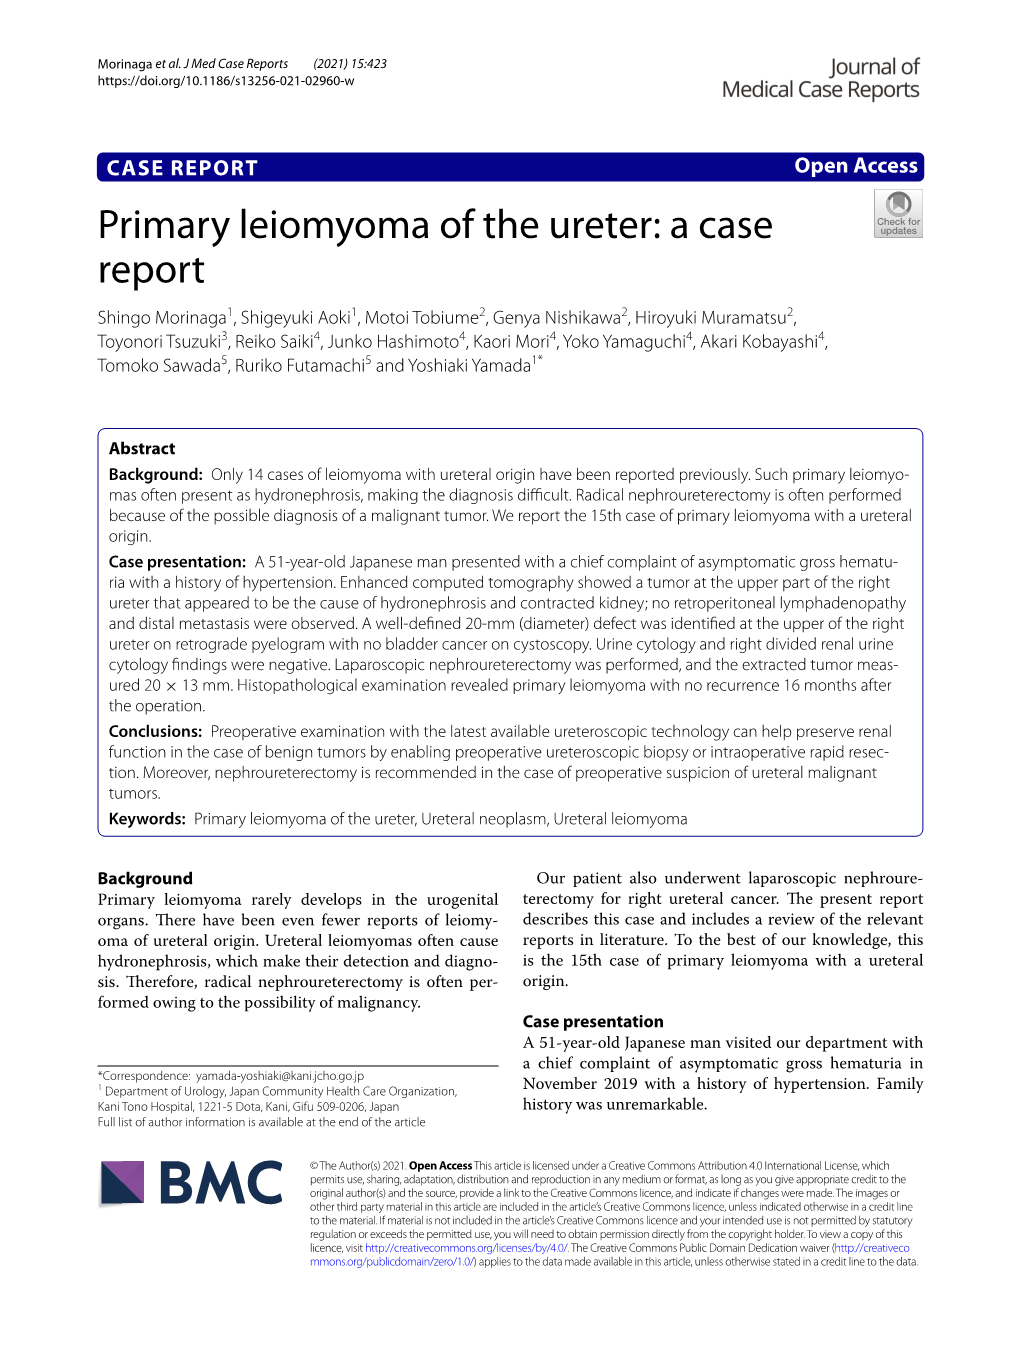 A Case of Primary Leiomyoma of the Ureter